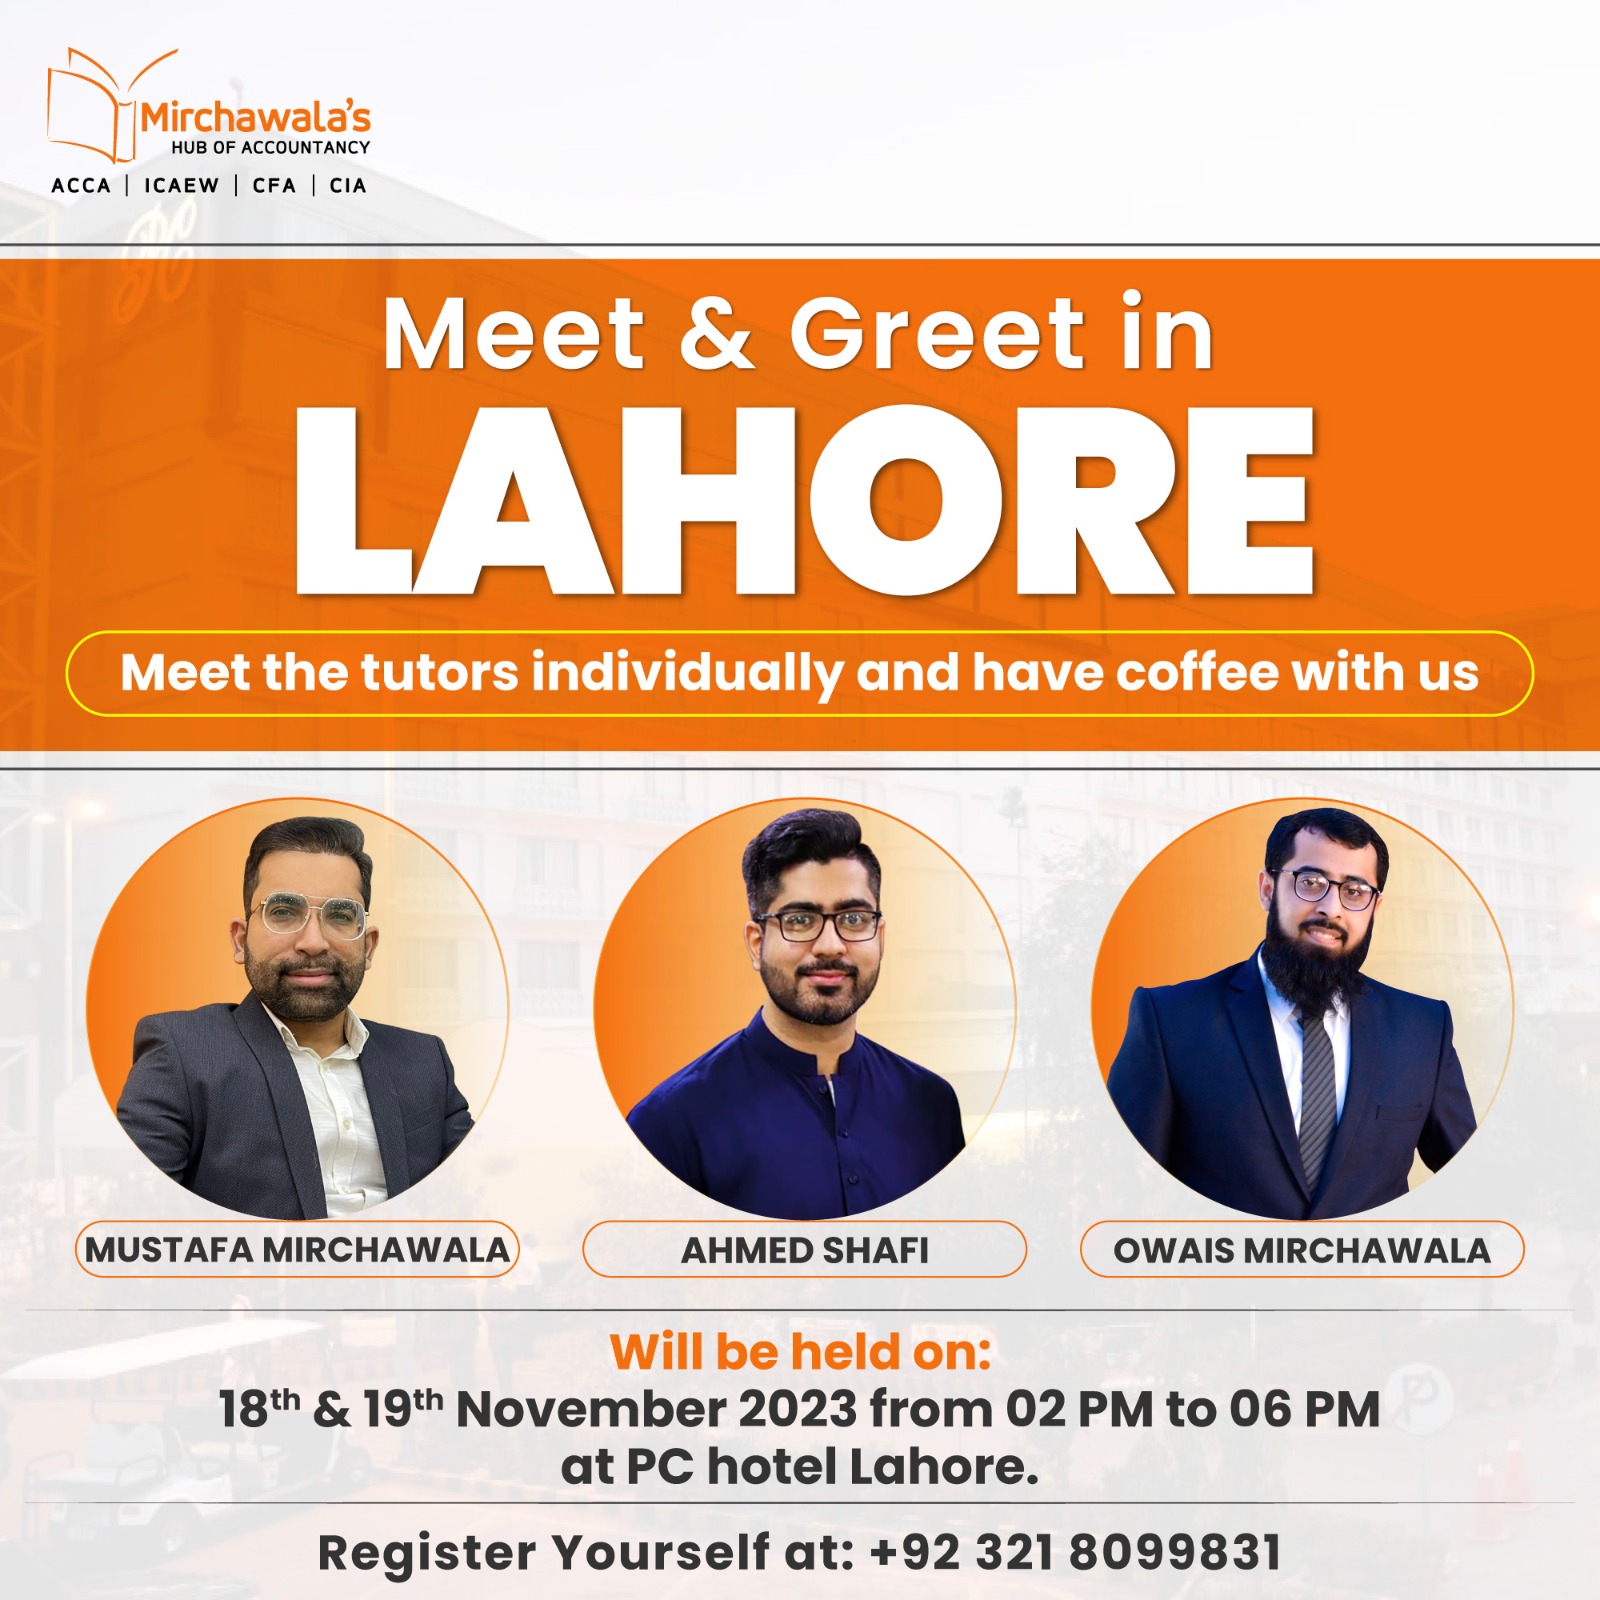 Meet & Greet of Mirchawala’s ACCA Faculty at PC Hotel, Lahore, Pakistan